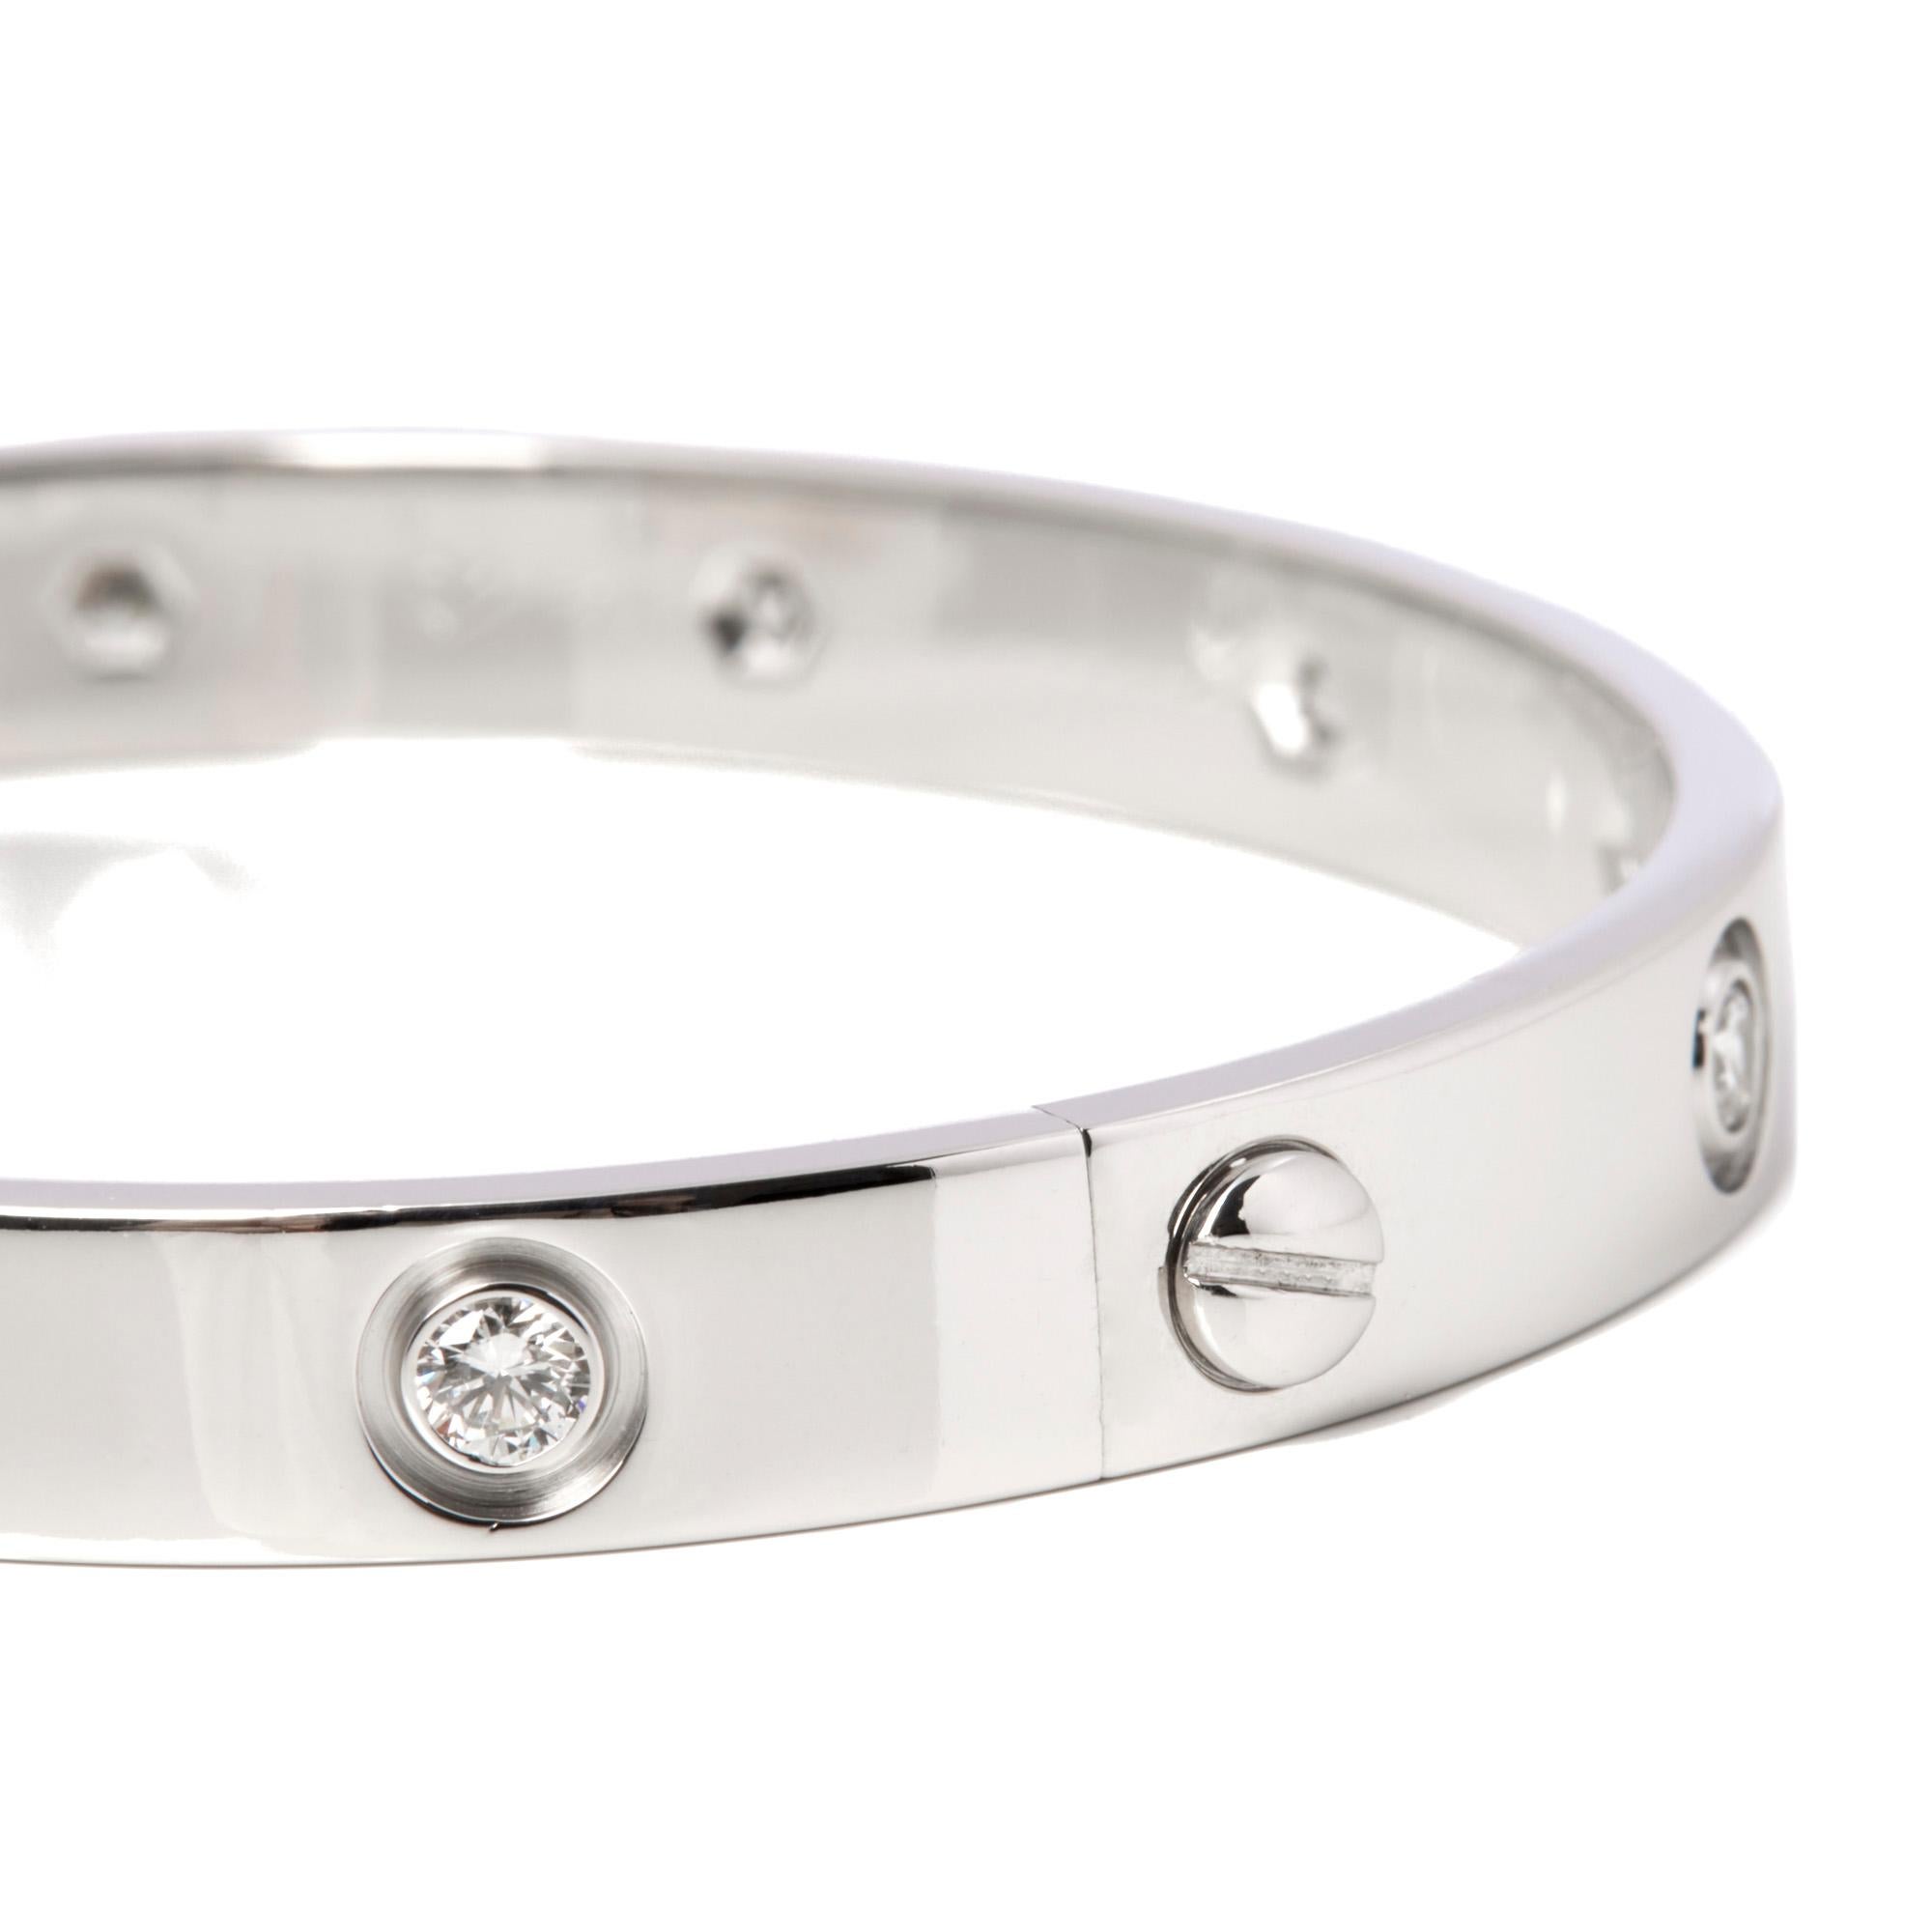 Cartier 10 Diamond 18ct White Gold Love Bangle In Excellent Condition For Sale In Bishop's Stortford, Hertfordshire